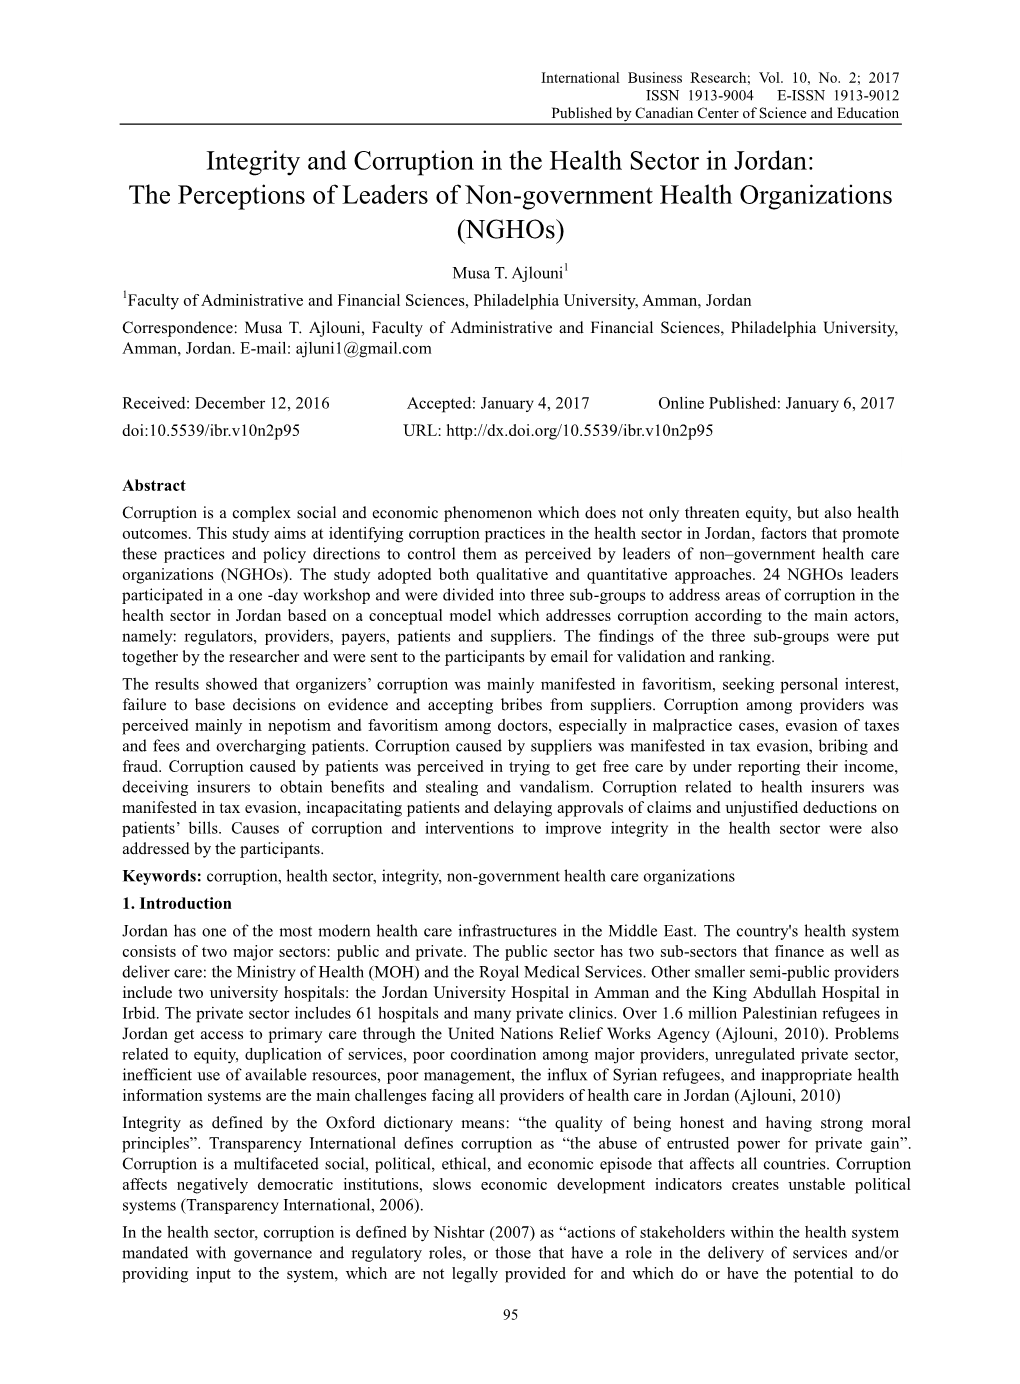 Integrity and Corruption in the Health Sector in Jordan: the Perceptions of Leaders of Non-Government Health Organizations (Nghos)